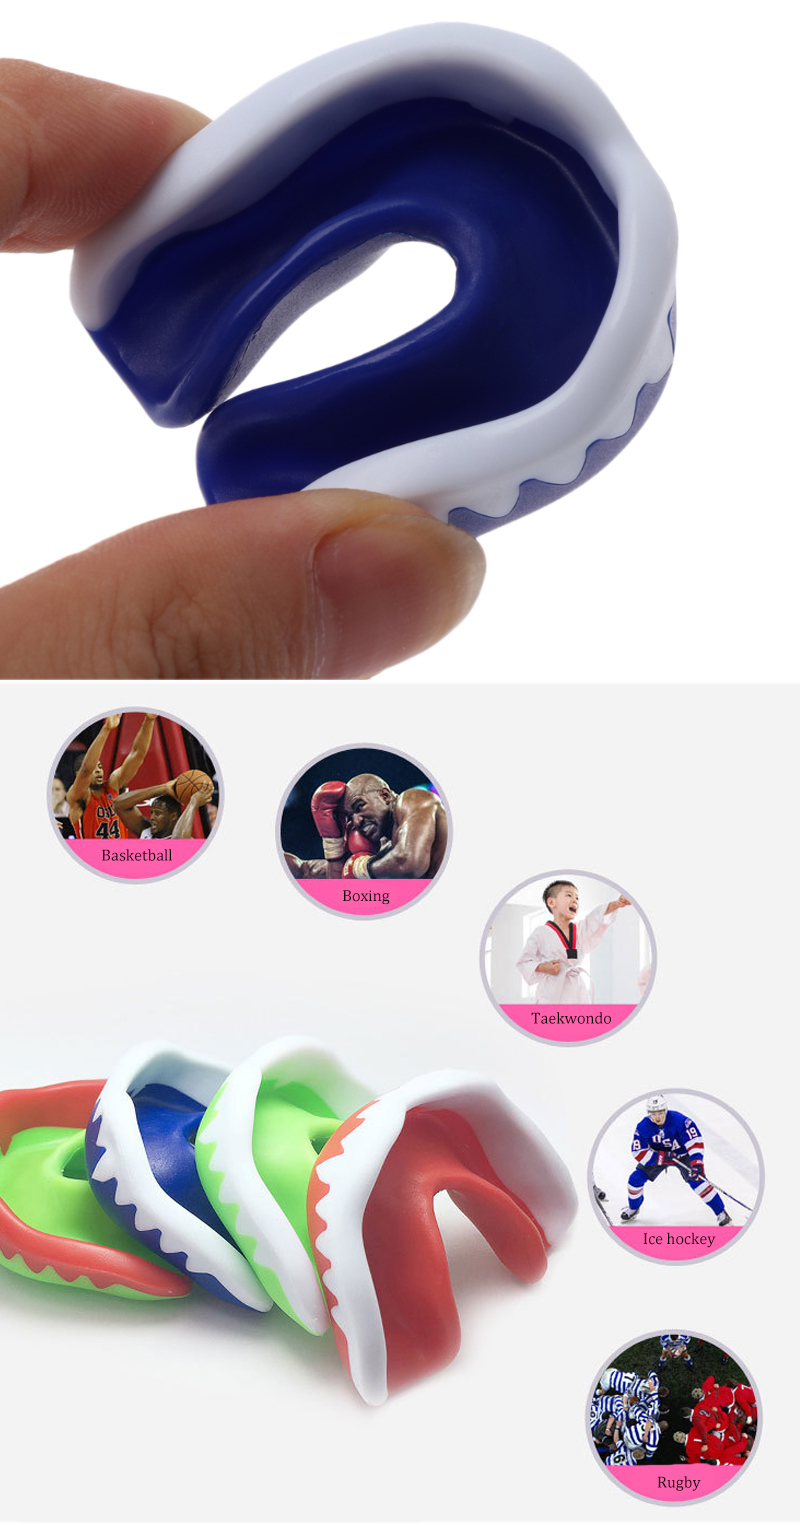 Teeth-Protector-Sports-Mouth-Protector-Braces-Boxing-Sports-Basketball-Karate-Safety-Mouth-Guard-1354109-2